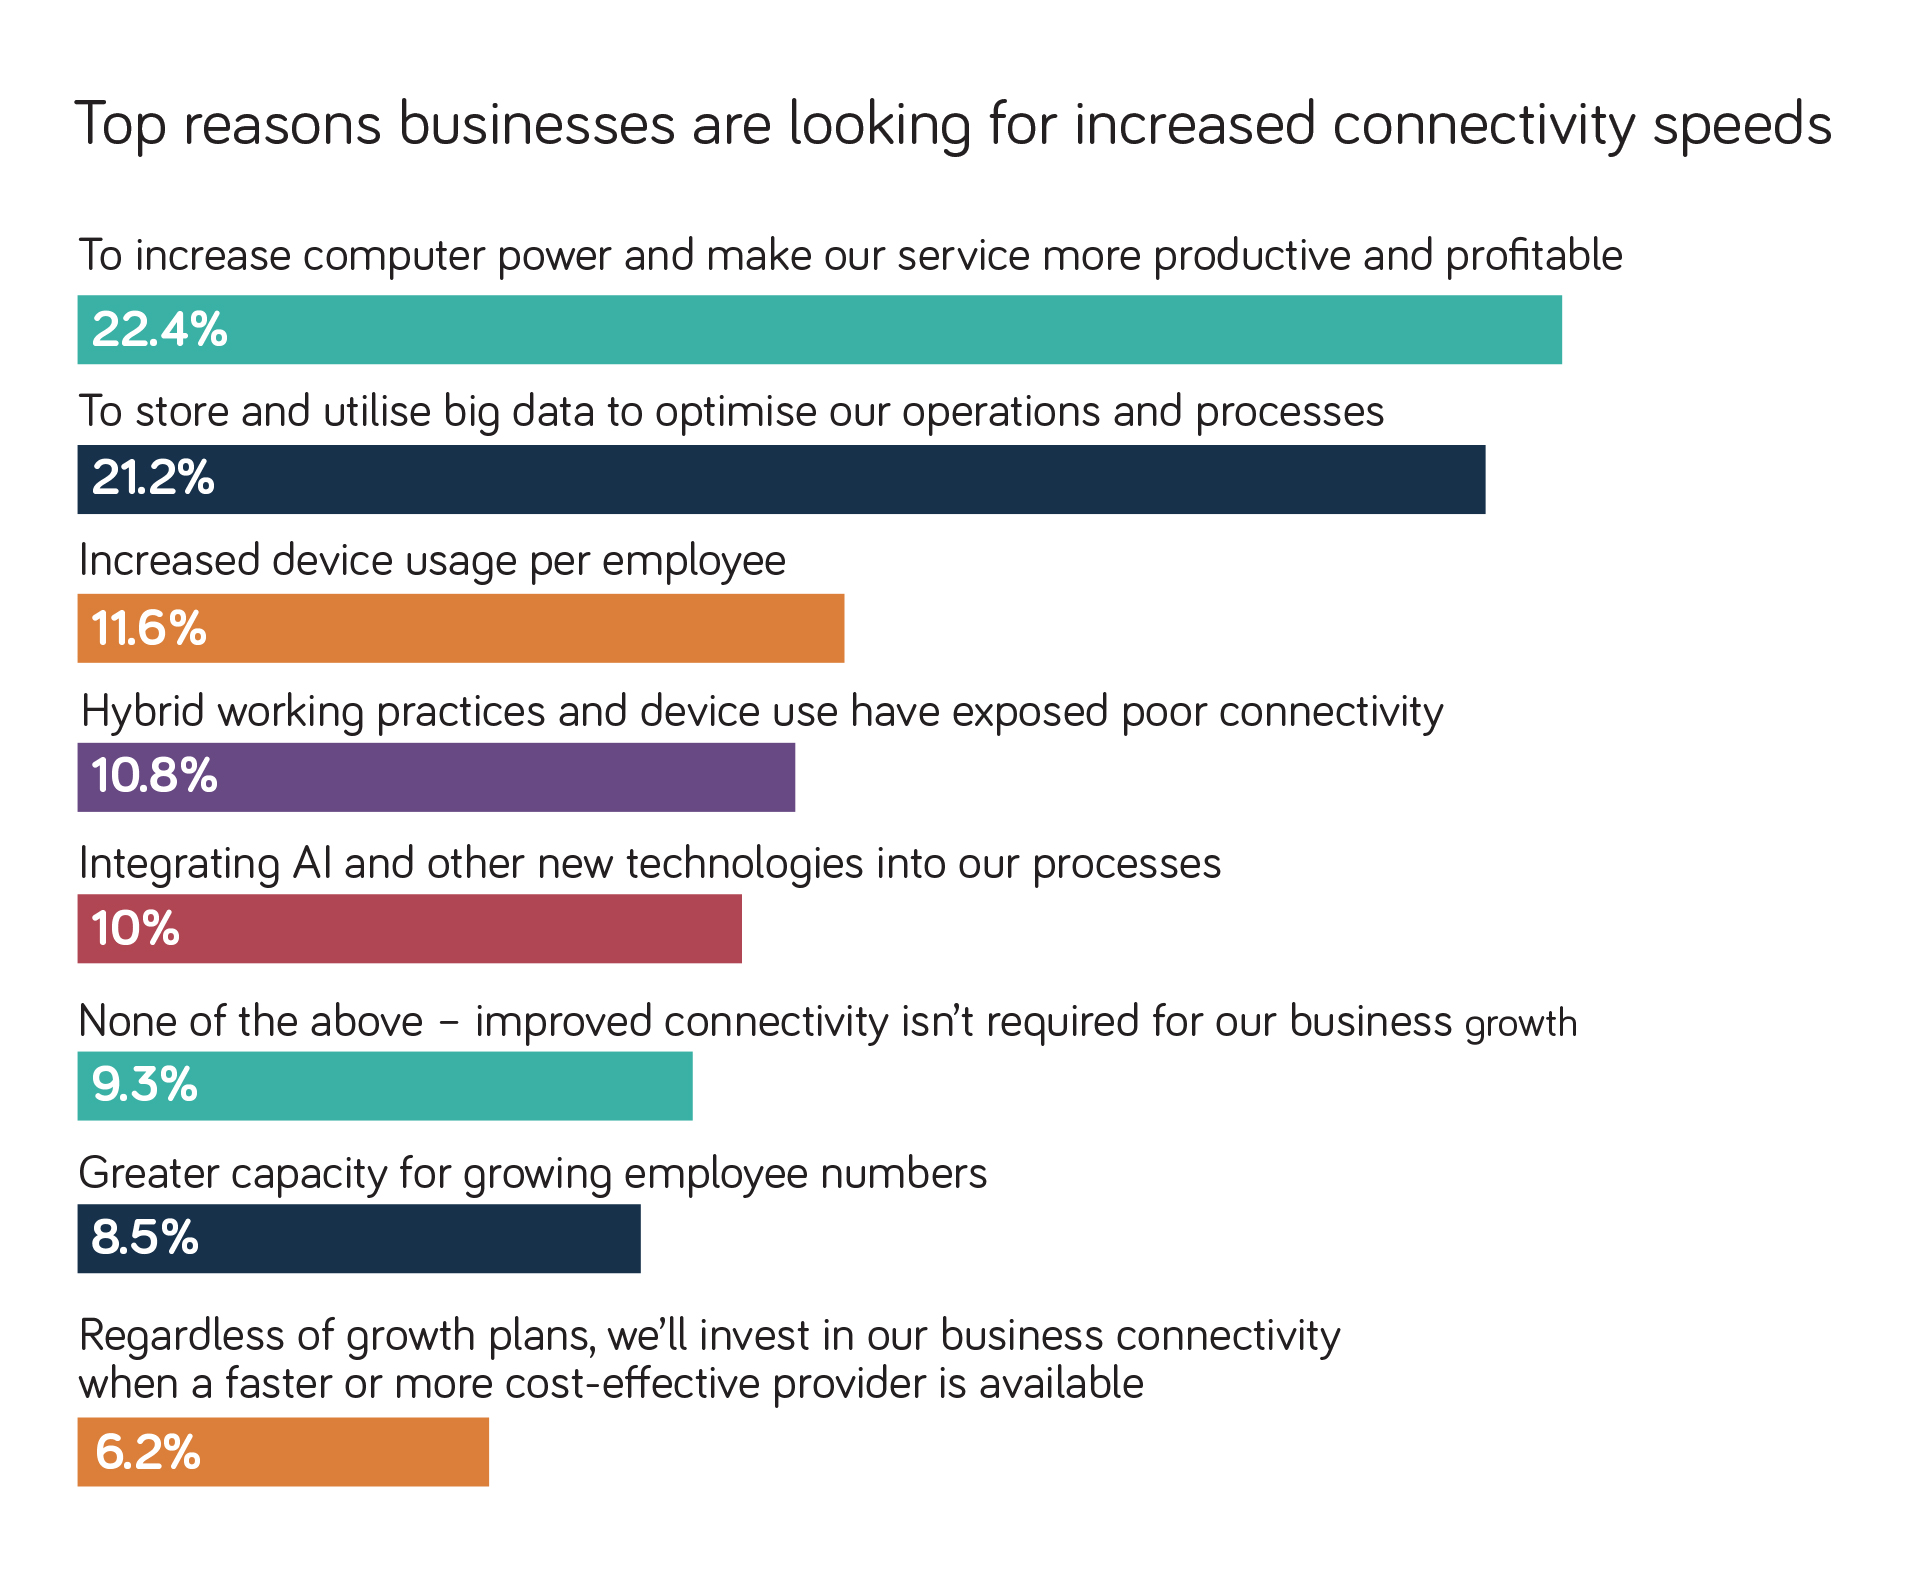 Bar chart: Top reasons for businesses looking for increased connectivity speeds